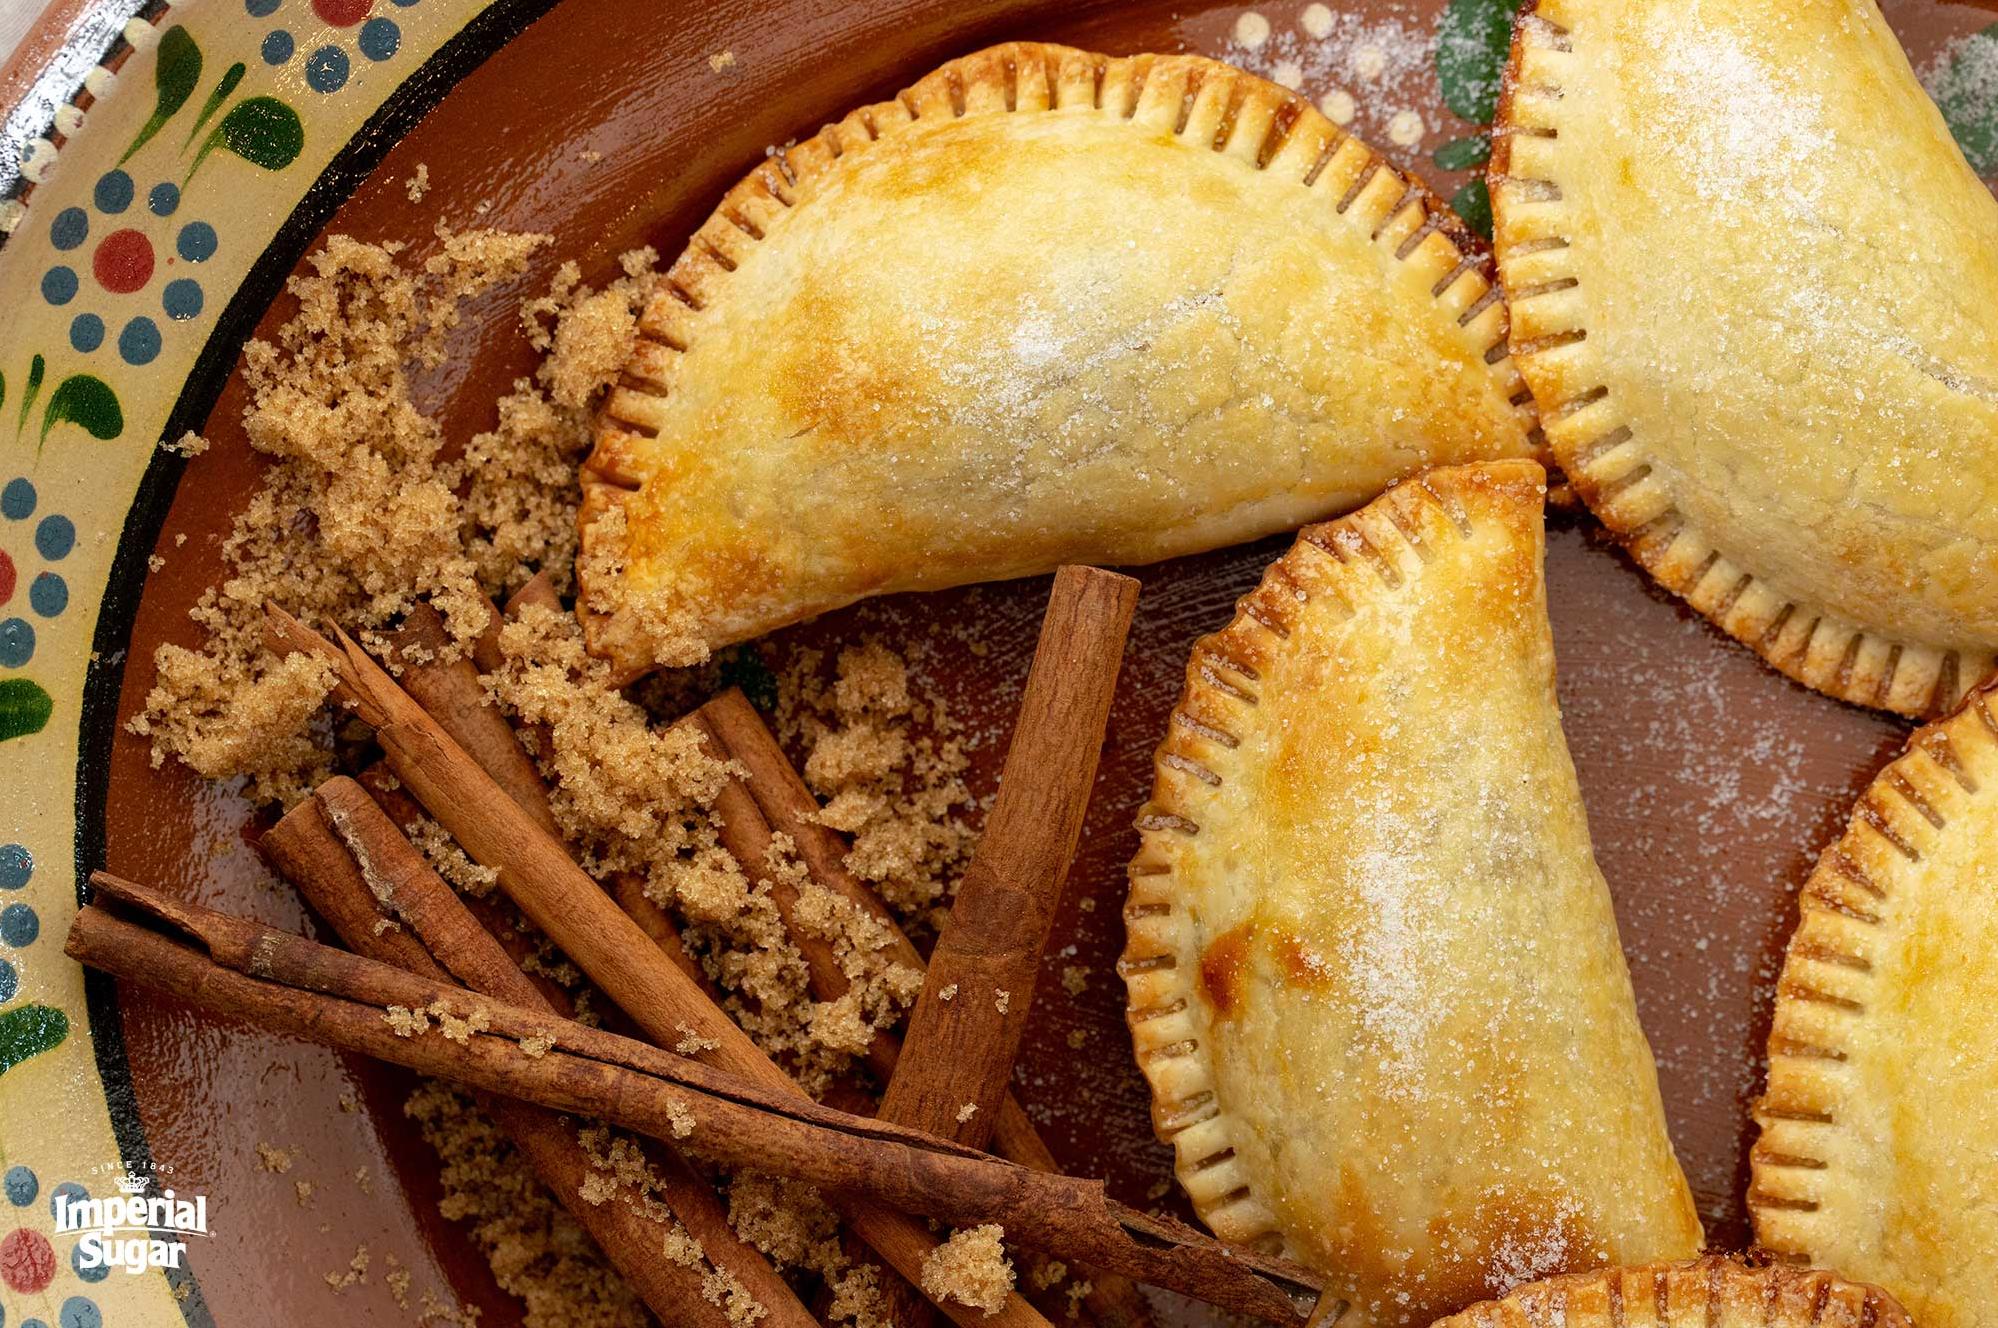  Get ready for a taste of fall with these Pumpkin Pecan Empanaditas.